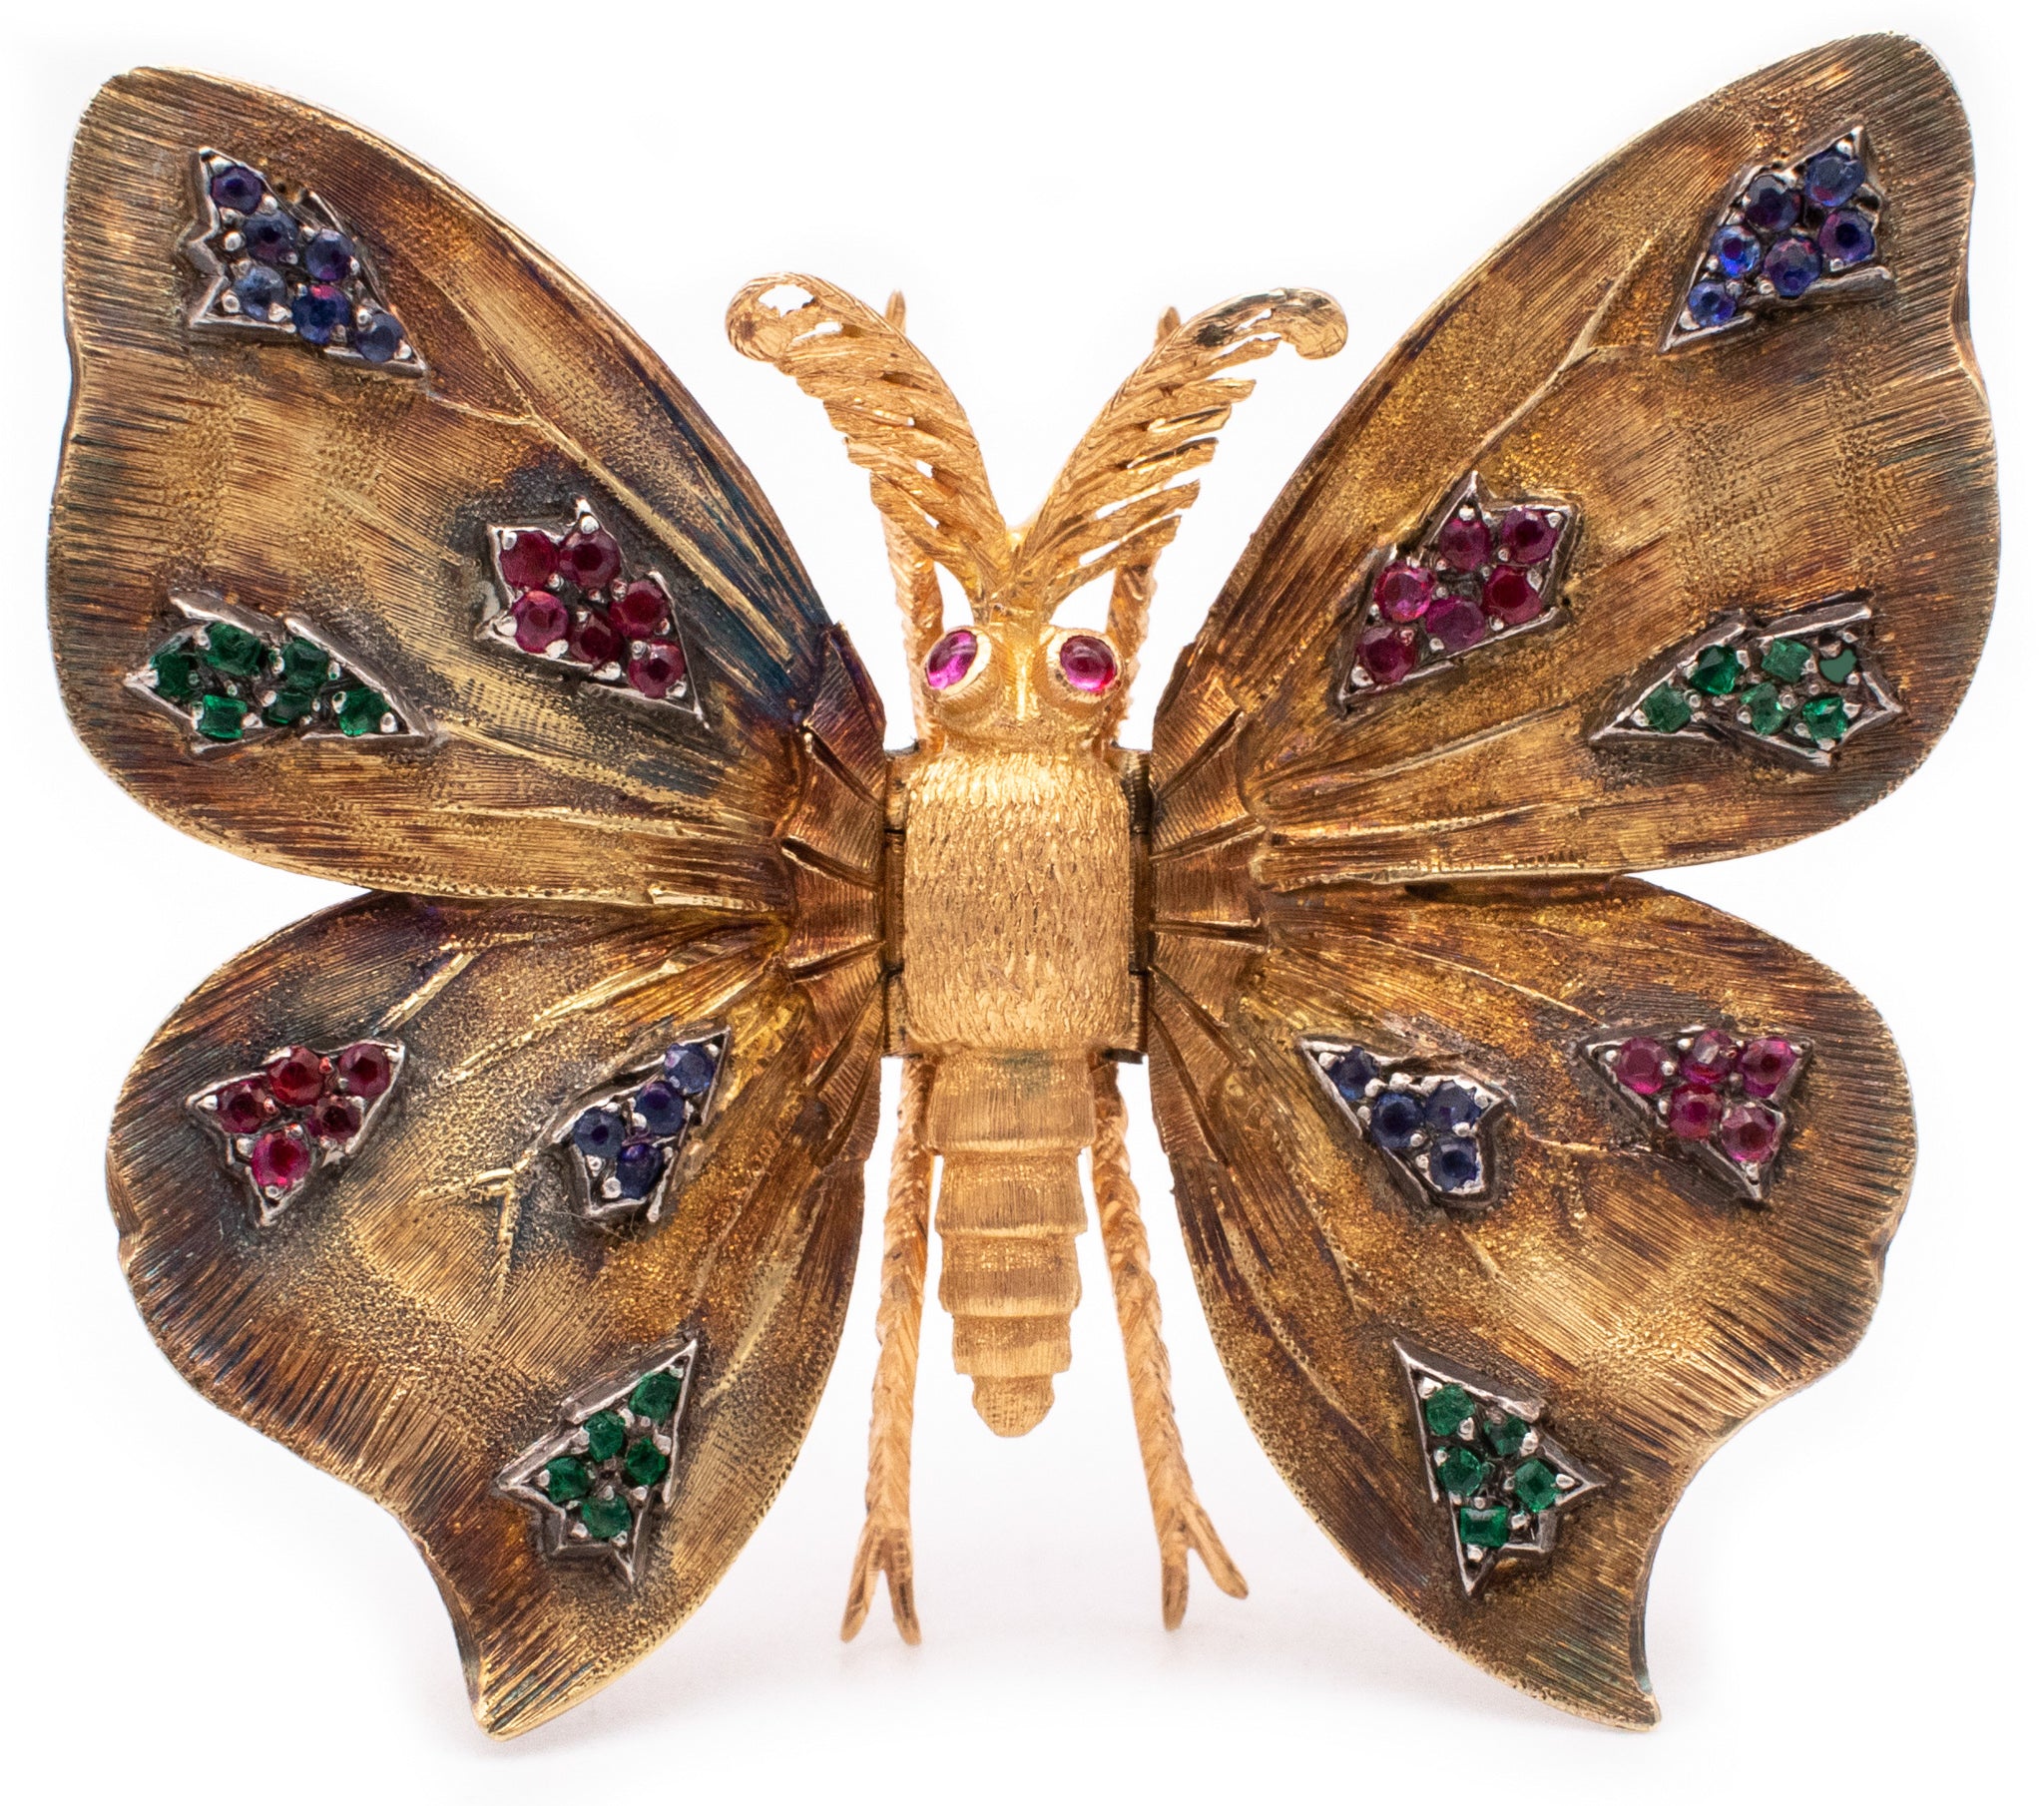 MARIO BUCCELLATI 1950 BRUSHED 18 KT GOLD BUTTERFLY BROOCH WITH 1.24 Cts GEMSTONES